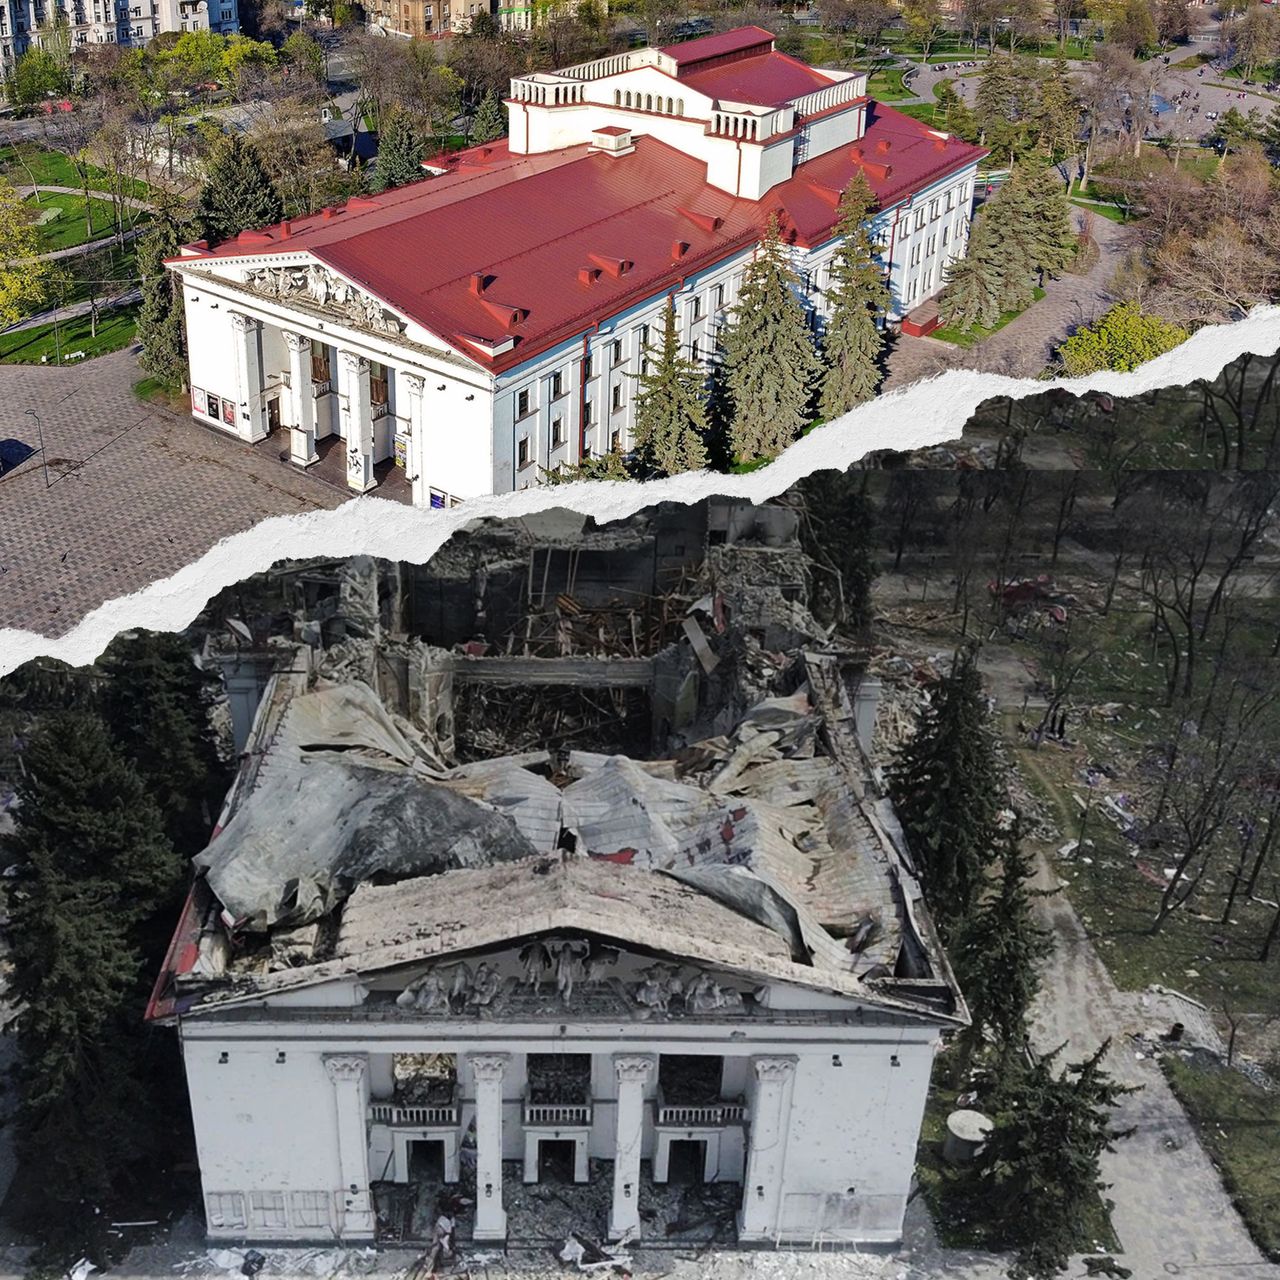 The only professional theater in Mariupol, Donetsk Academic Regional Drama Theatre, was constructed in the 1950s in the style of monumental Soviet classicism. After Russian bombing on March 16, this city’s cultural center became a mass grave for hundreds of children and adults hiding there, becoming a symbol of the humanitarian catastrophe in Ukraine.